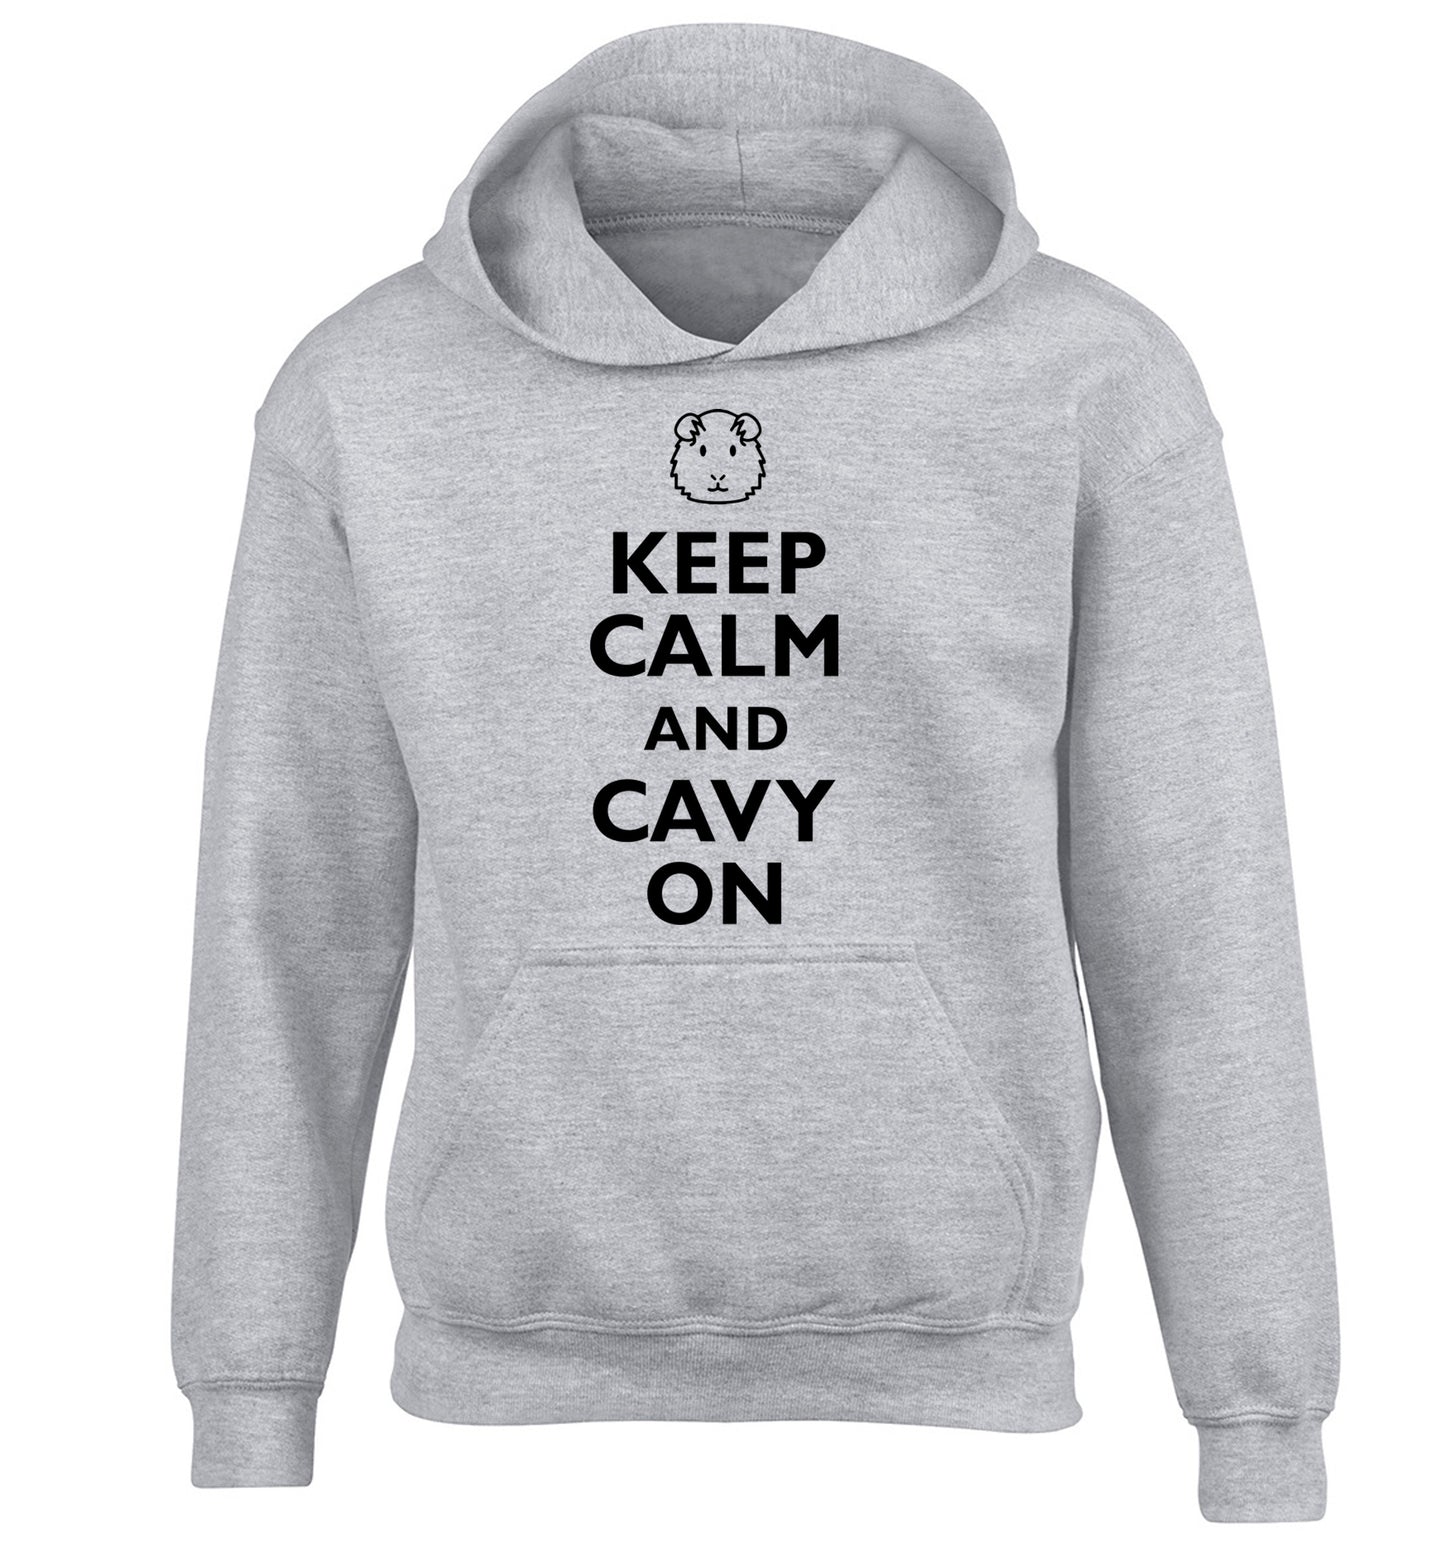 Keep calm and cavvy on children's grey hoodie 12-14 Years